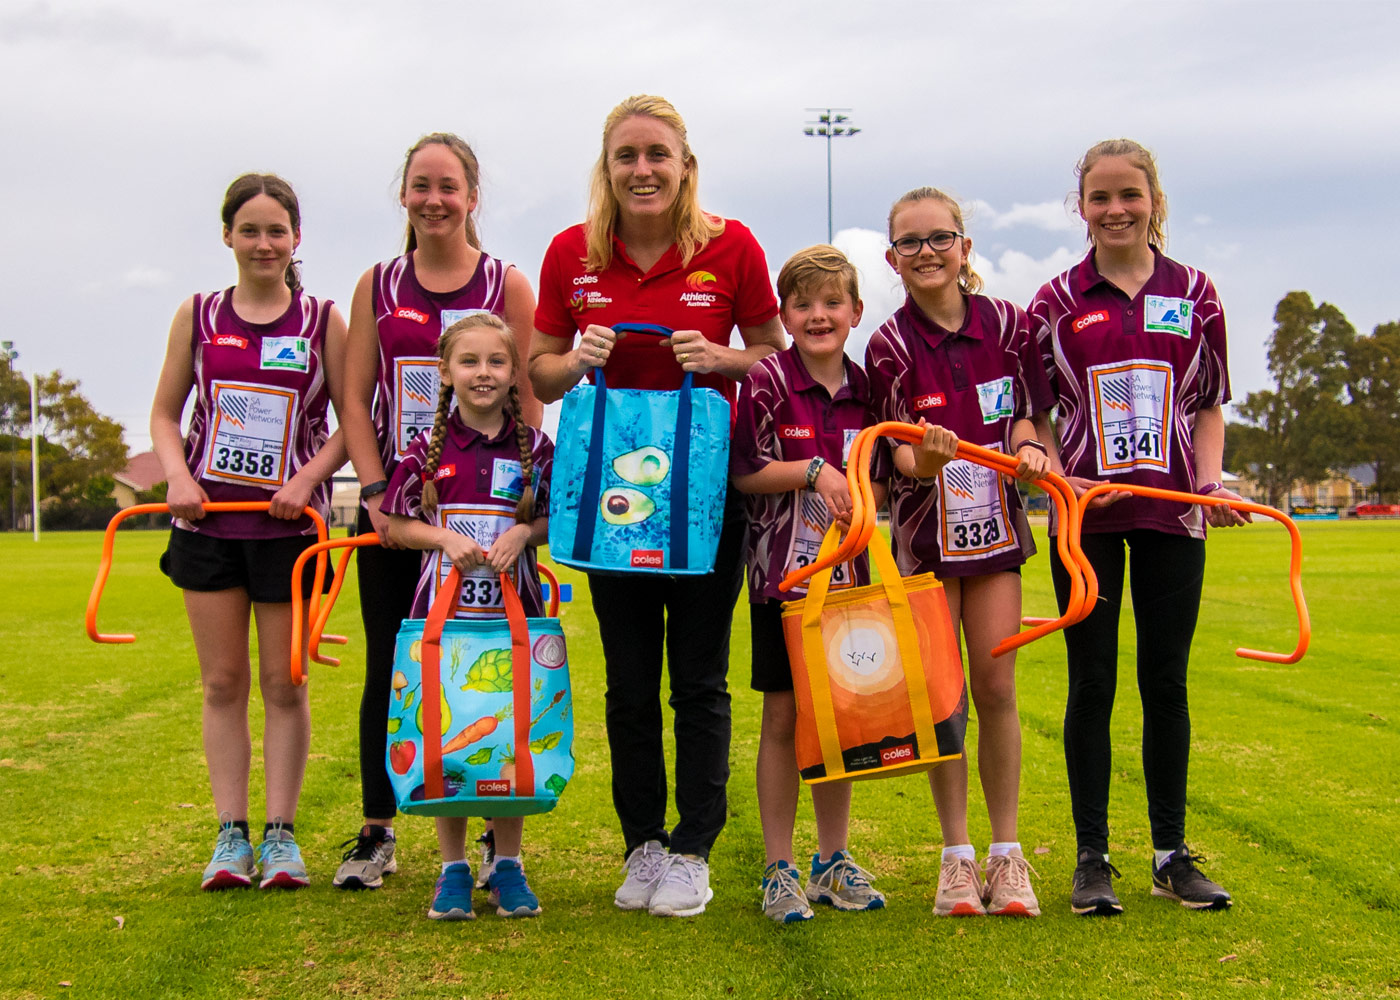 Olympic & World Champion Sally Pearson with athletes from Mid Coast Little Athletics Centre (SA) and their new equipment and the Coles Community Bags